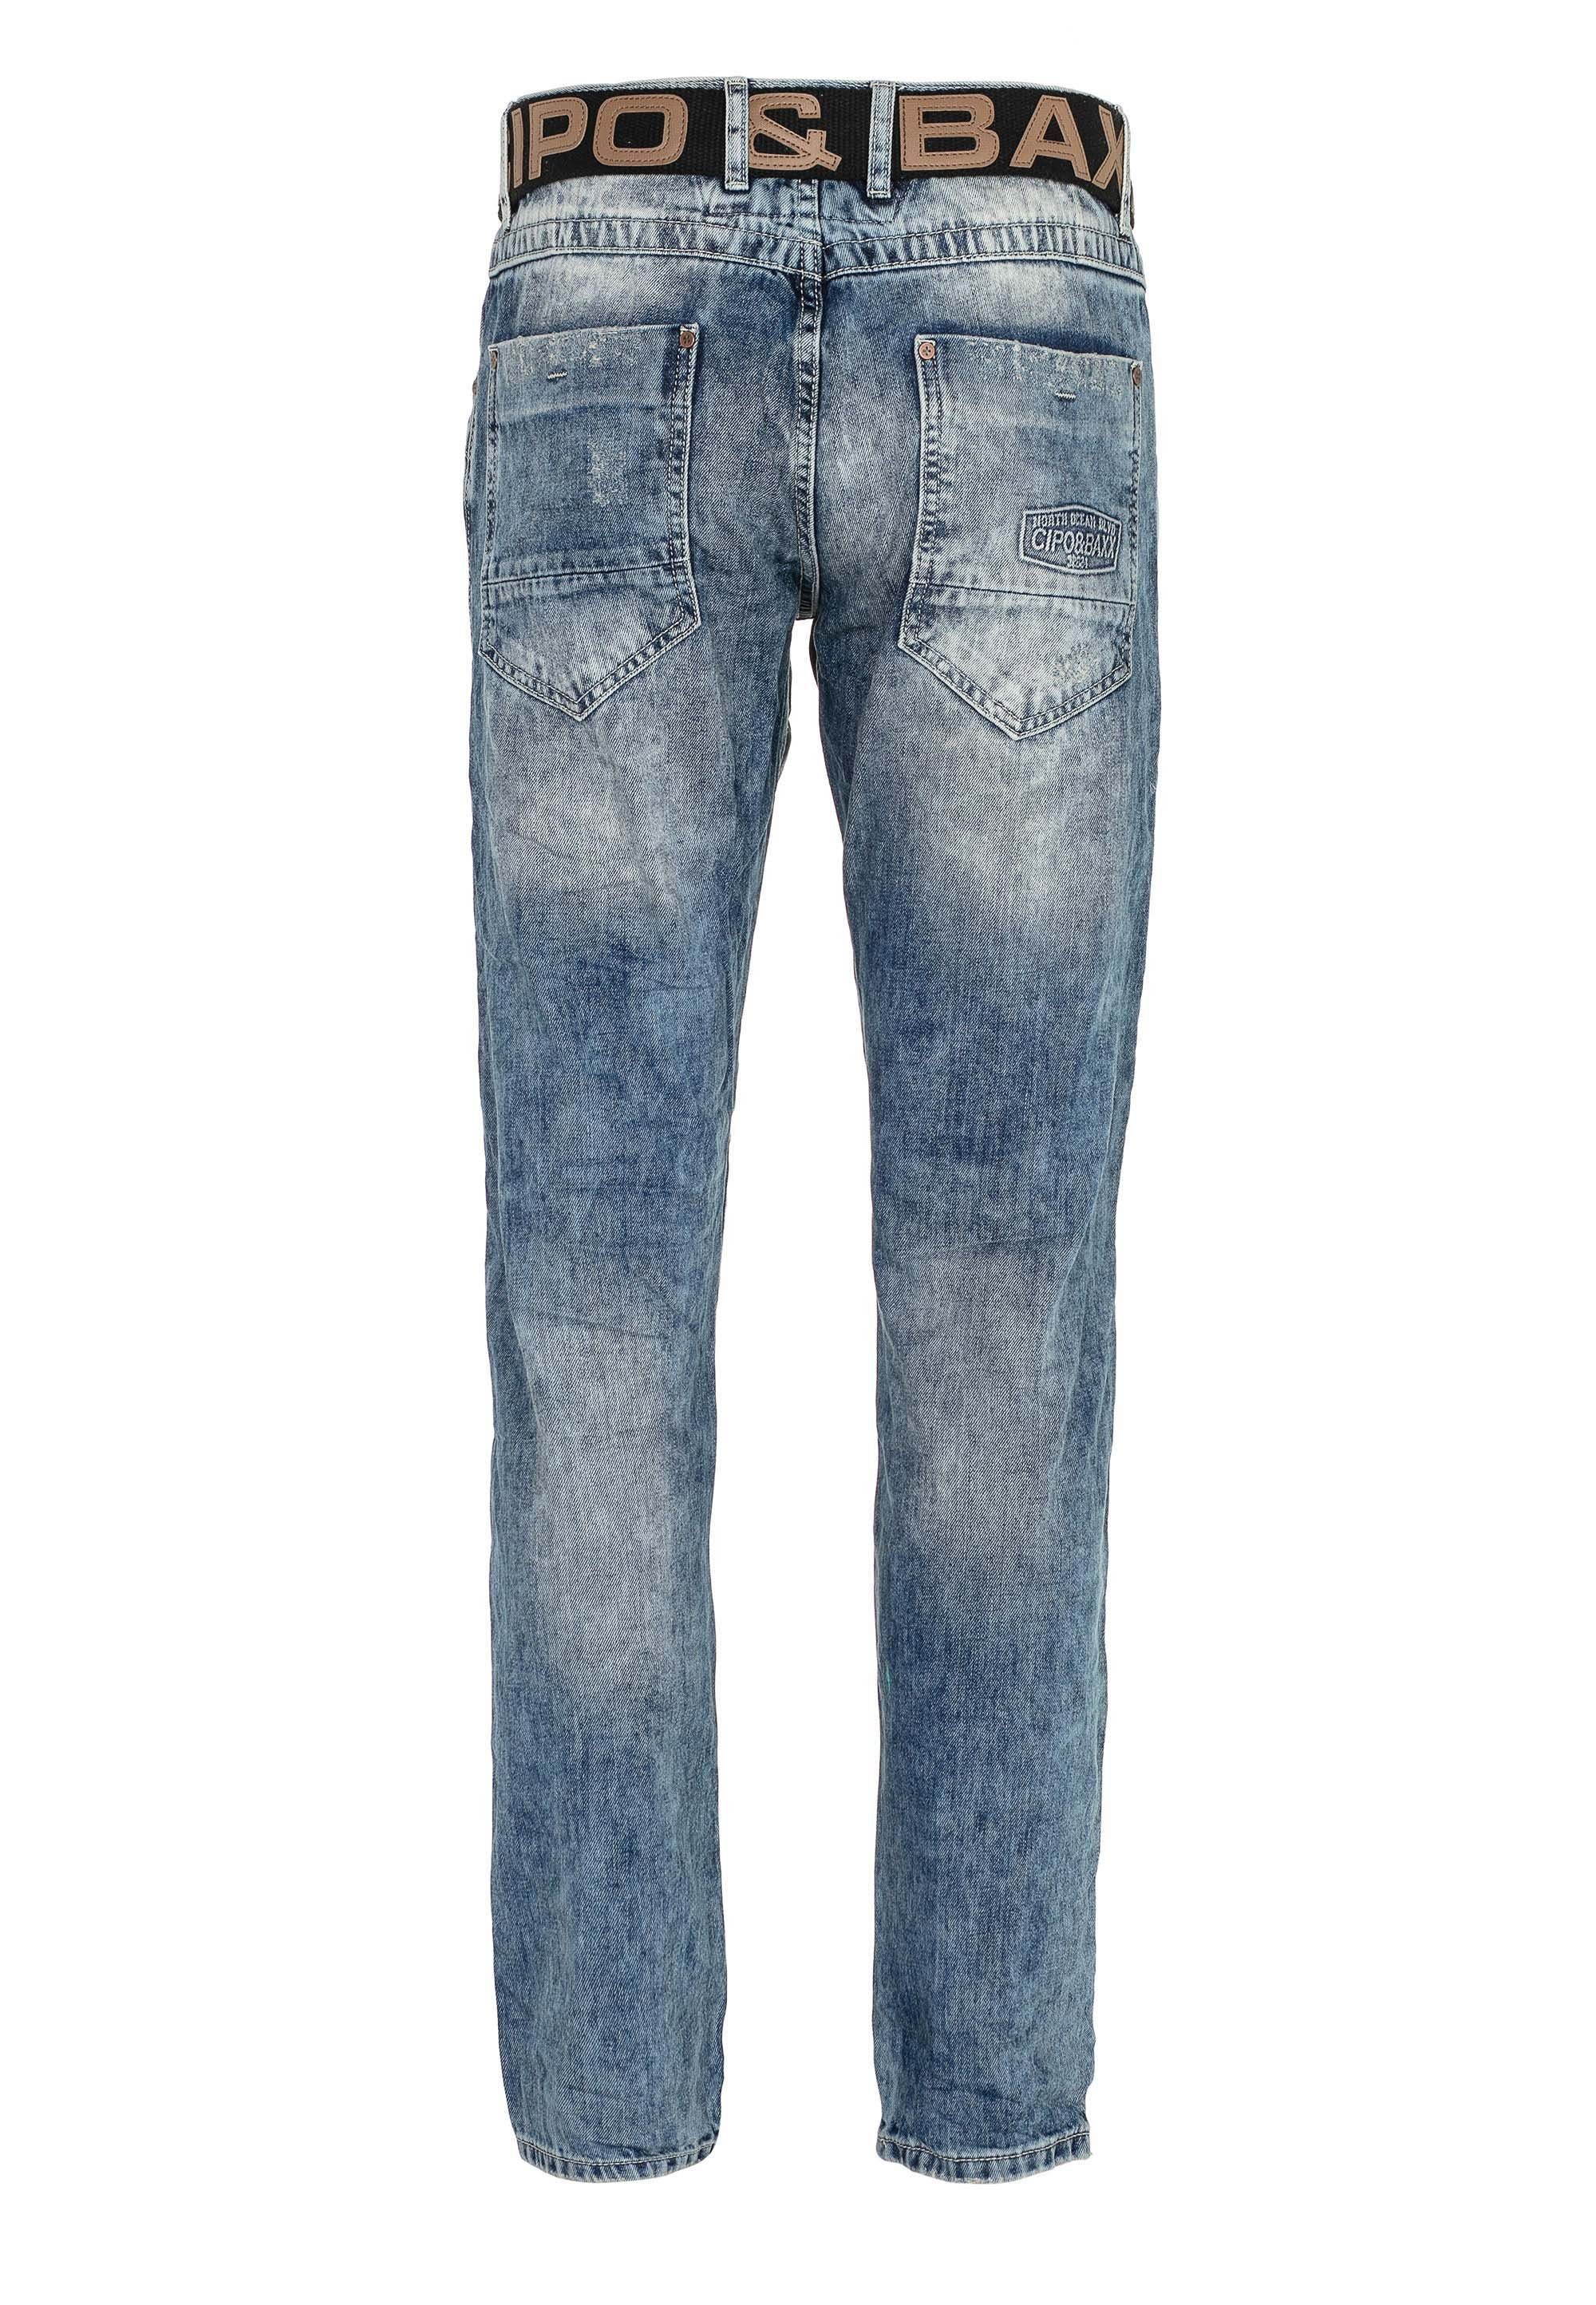 Cipo & Baxx Bequeme Jeans Straight-Fit mit Details Ripped in